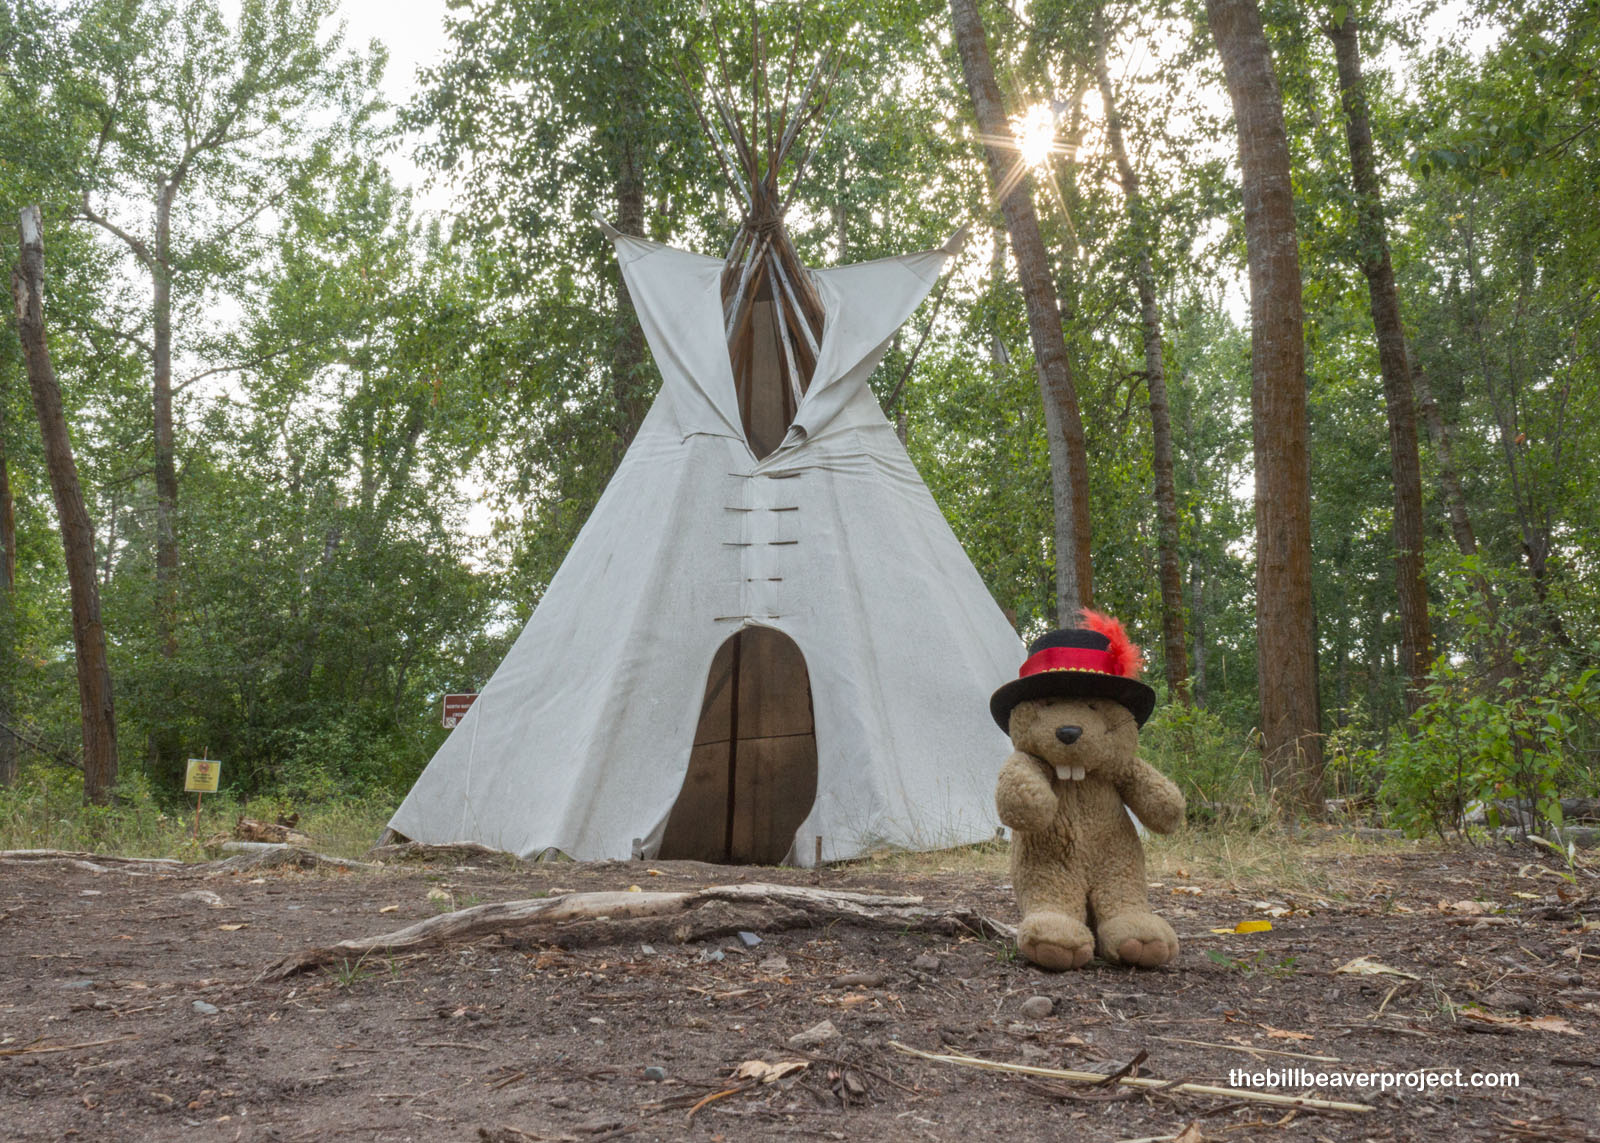 A reconstructed teepee or tipi!